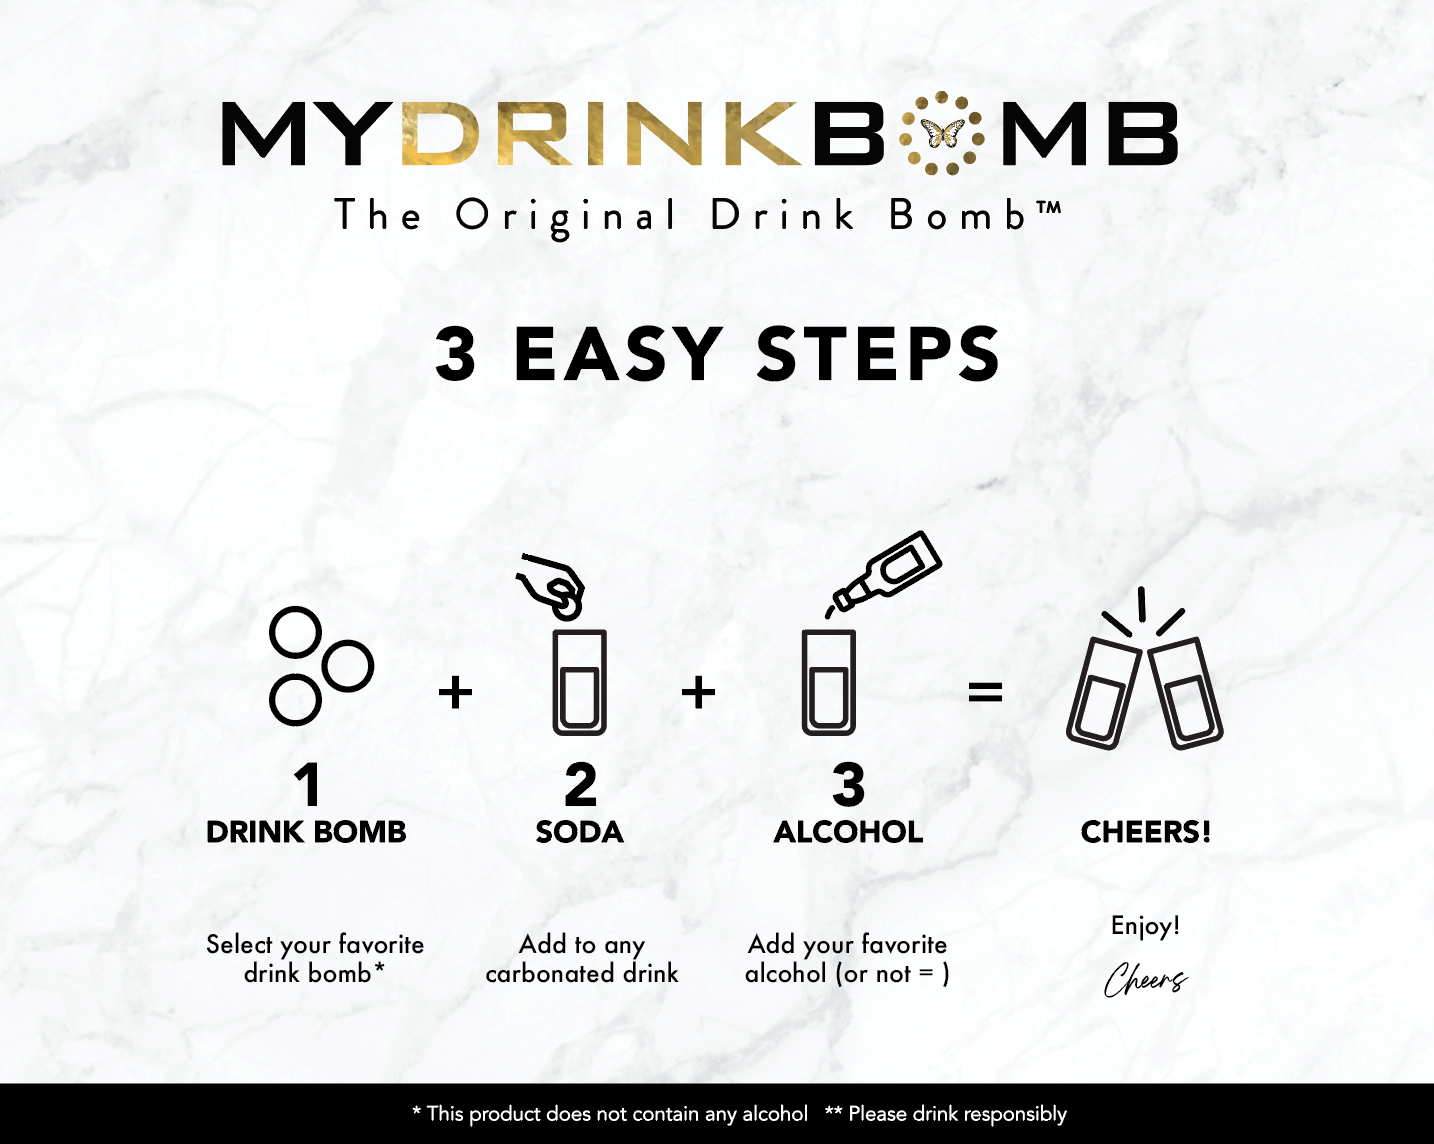 https://mydrinkbomb.com/wp-content/uploads/2021/01/craft-cocktail-drink-bomb-how-to-use.png